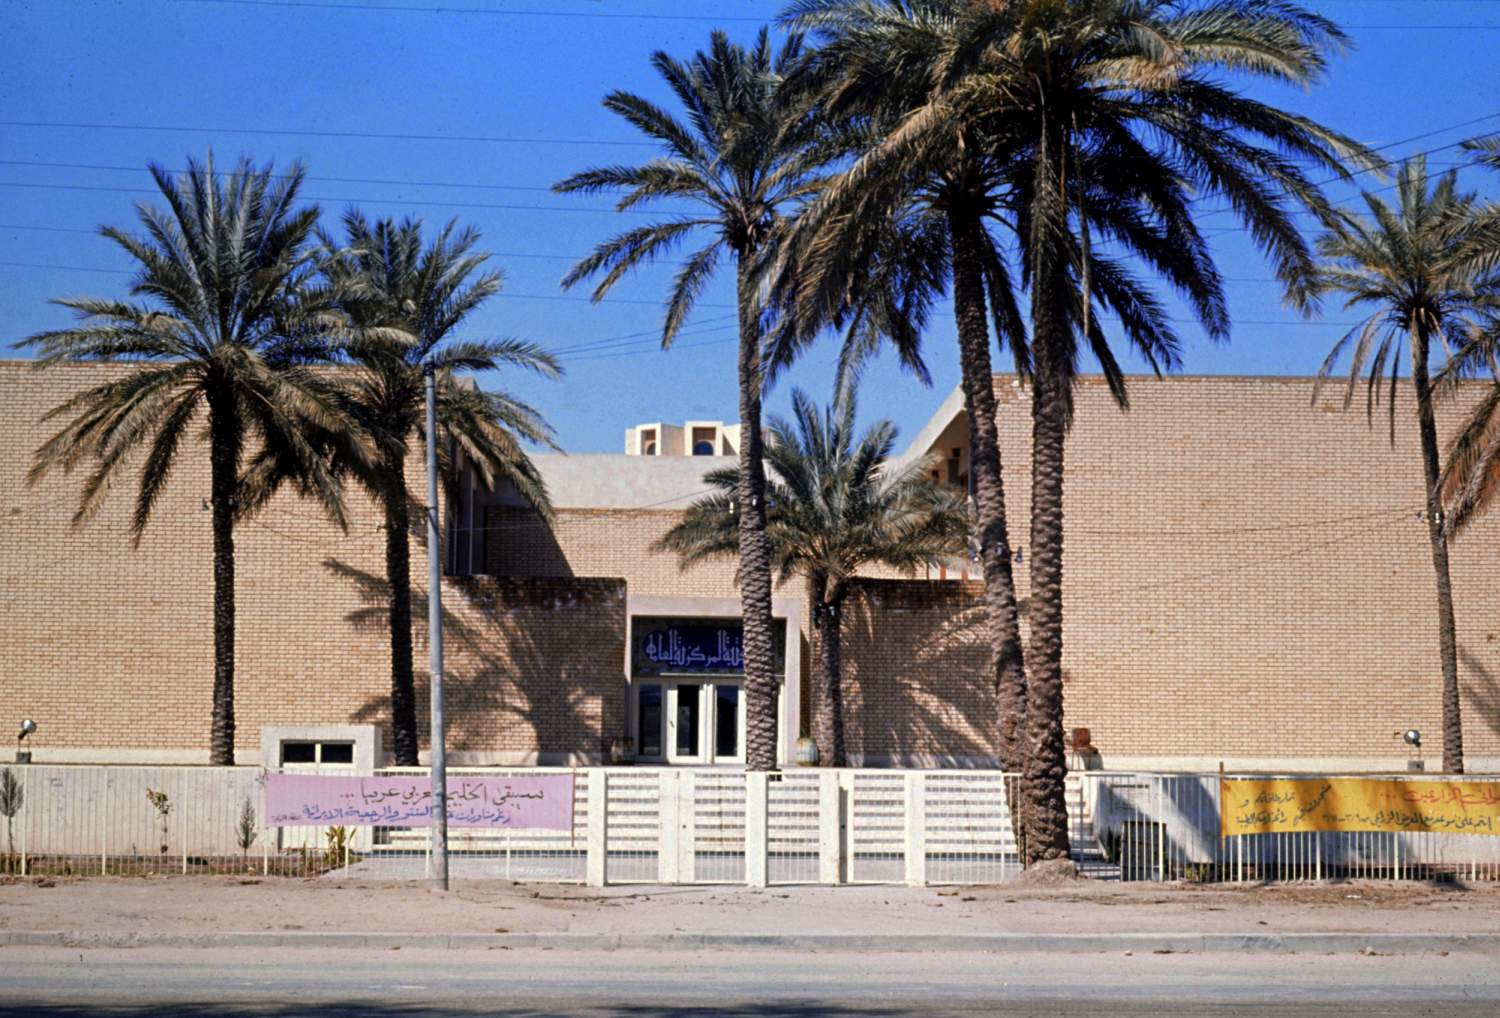 <p>Library entrance, seen from across the street.</p>